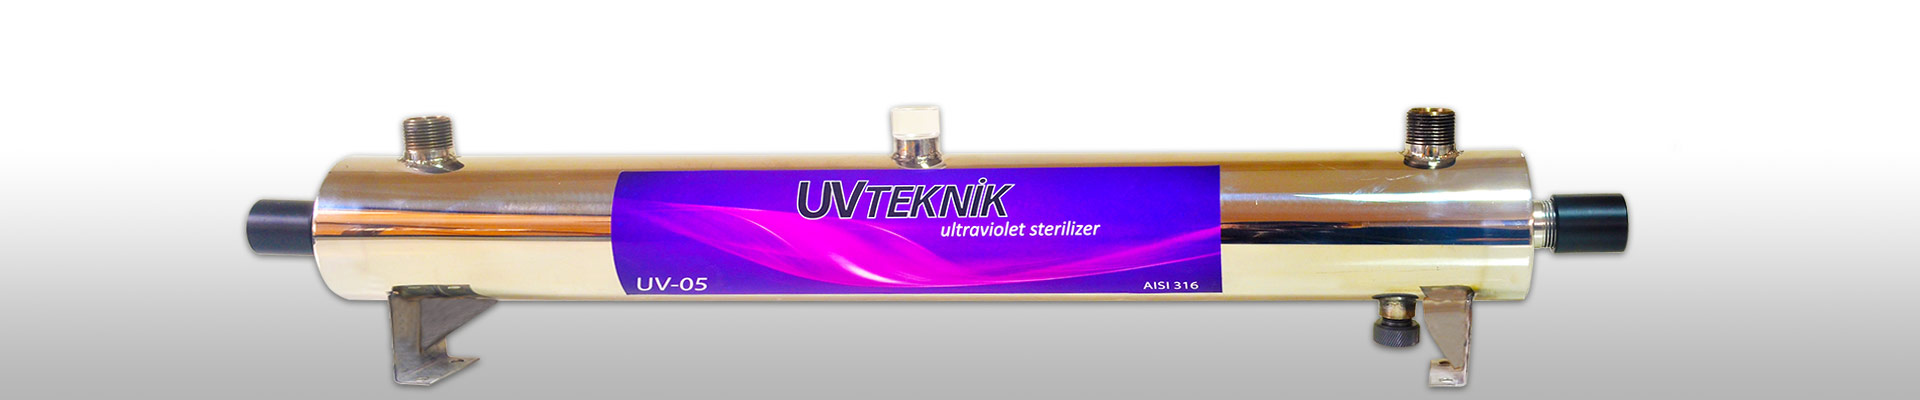 UV Disinfection Systems